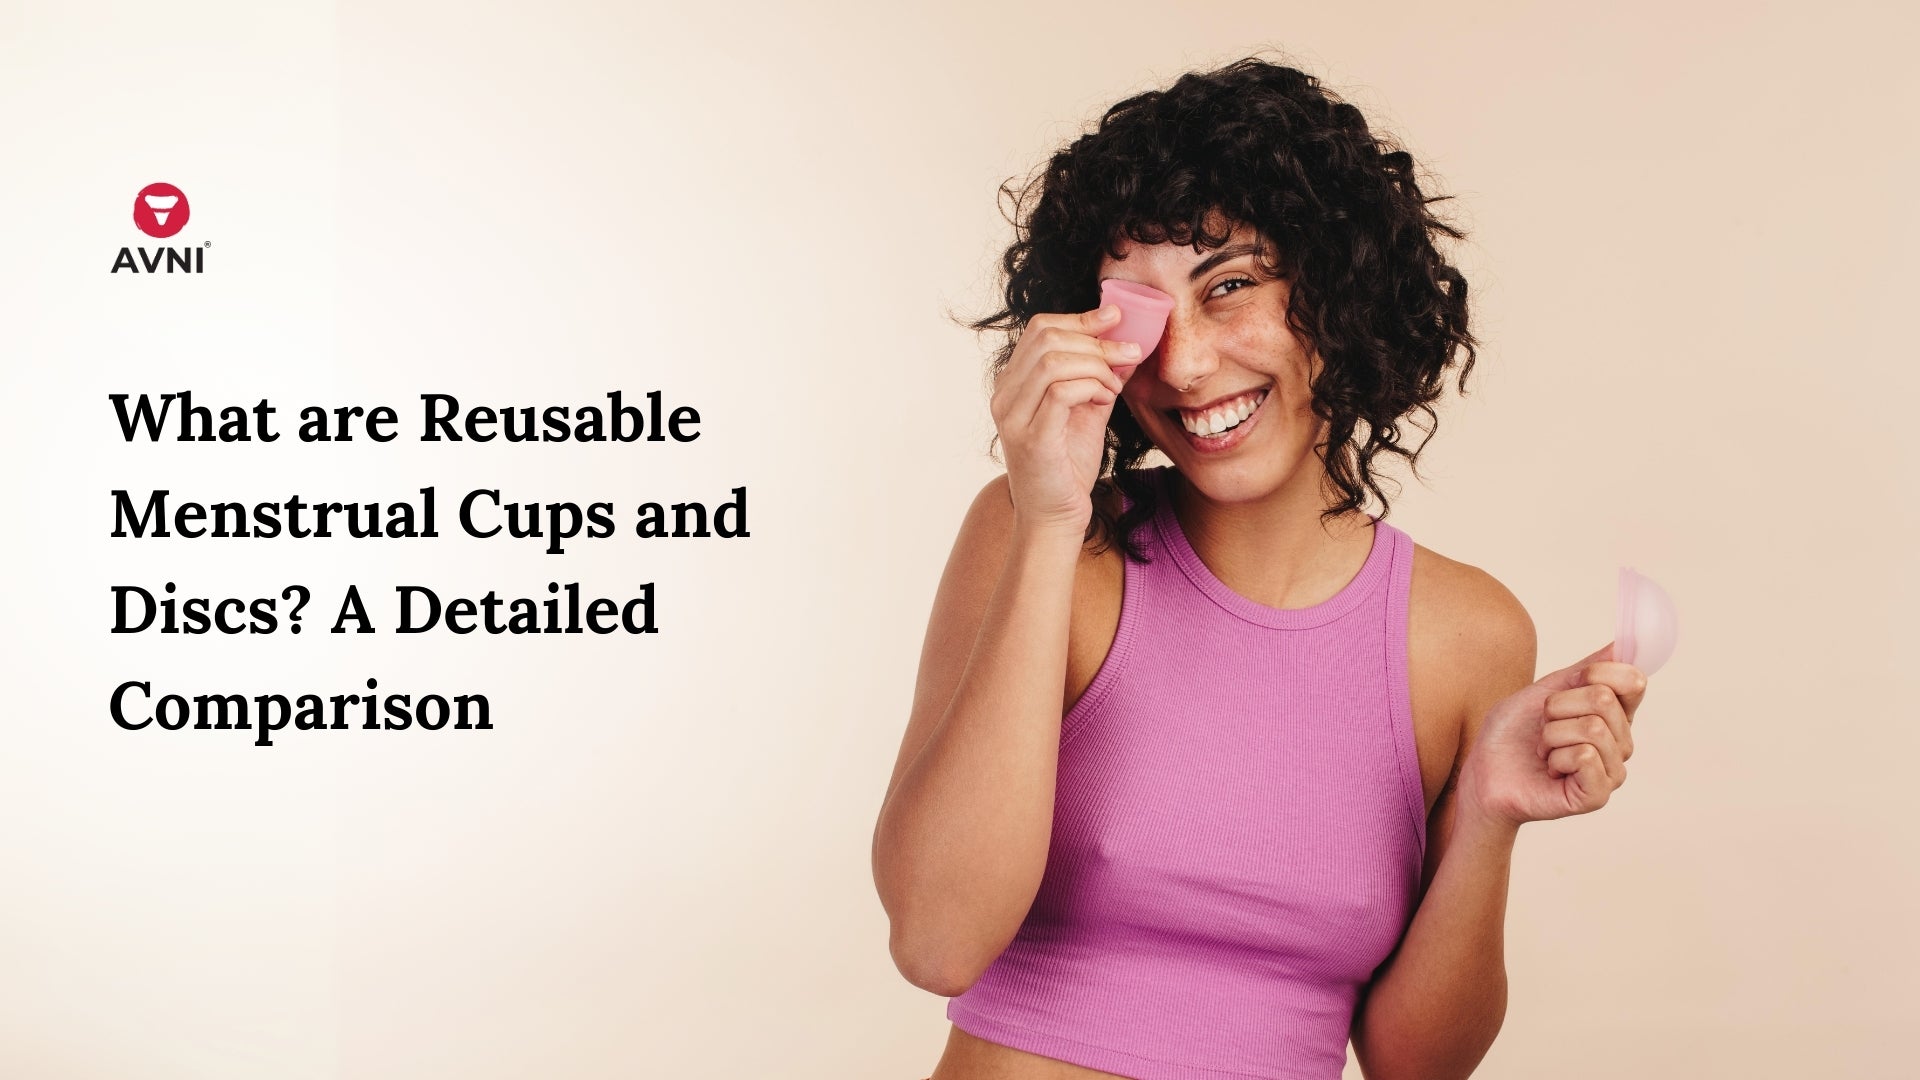 What are Reusable Menstrual Cups and Discs? A Detailed Comparison